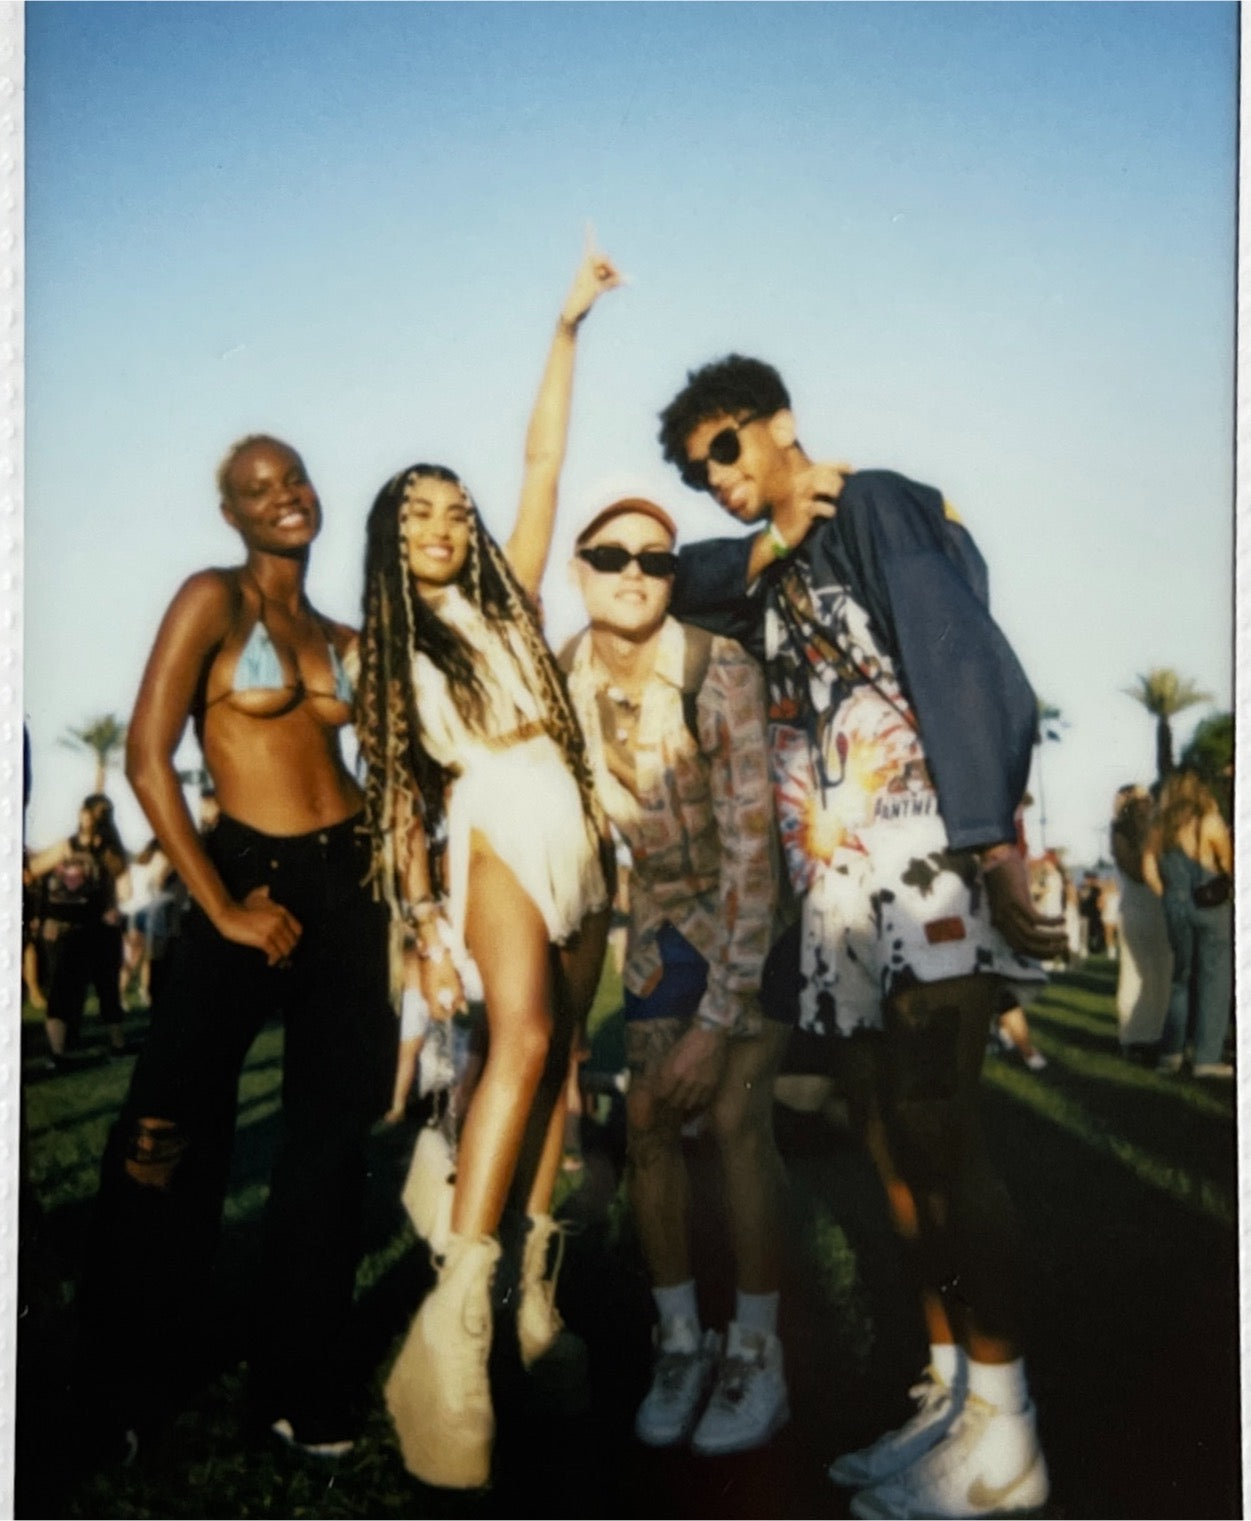 4 young people pose for the camera at Coachella.